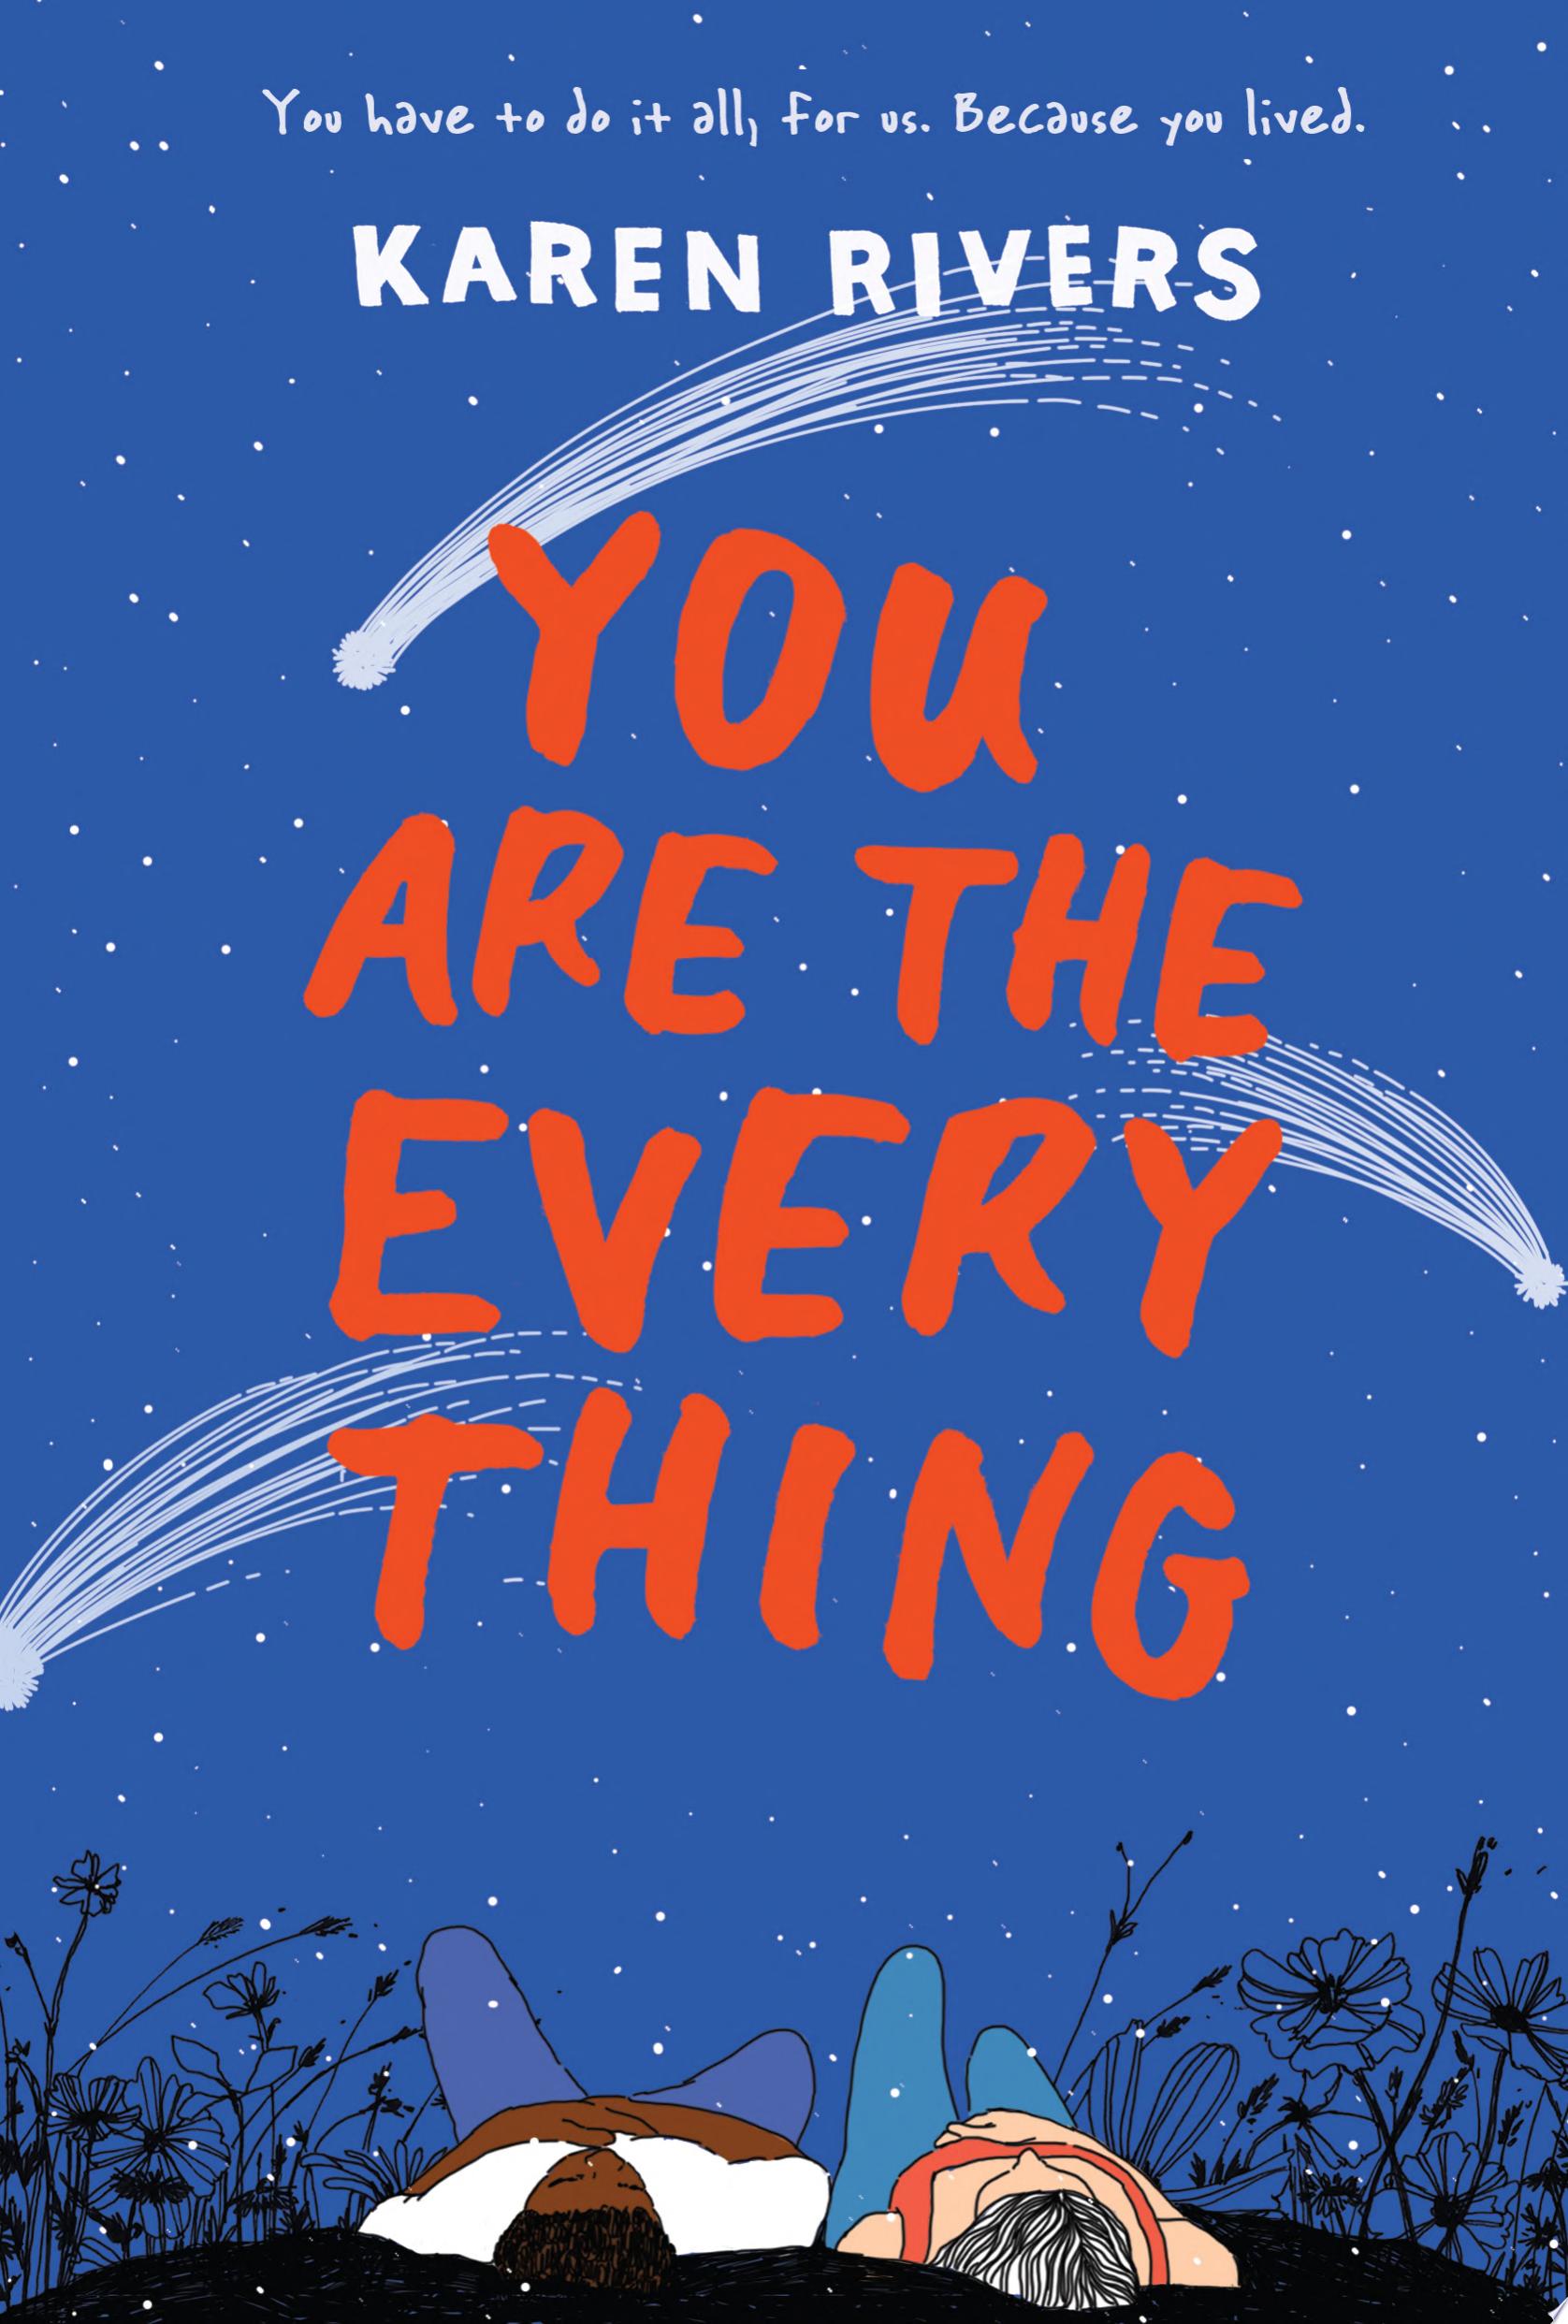 Image for "You Are The Everything"